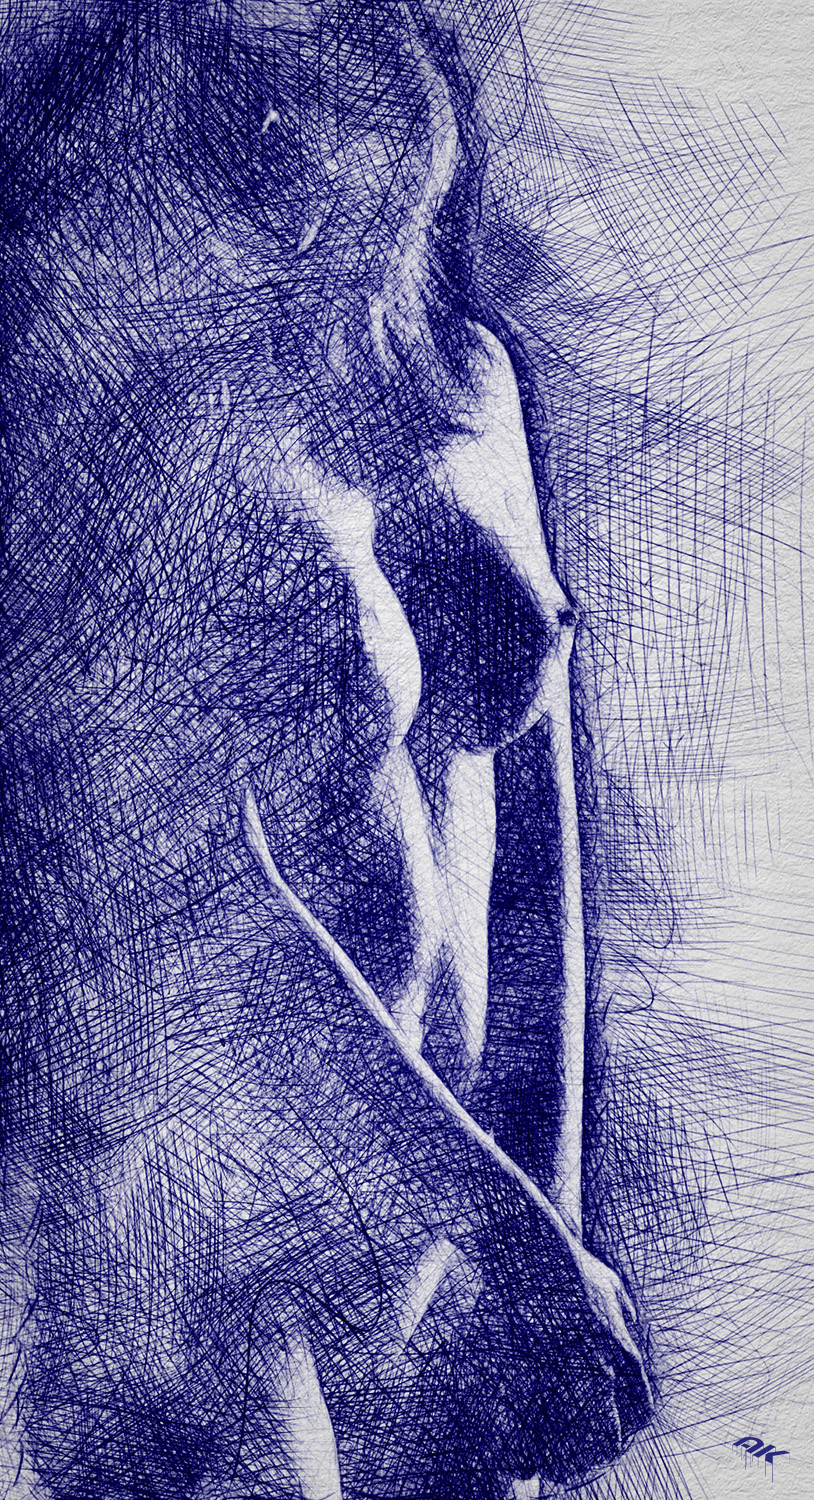 life-drawing-series-5-image-11-copyright-andrew-knutt